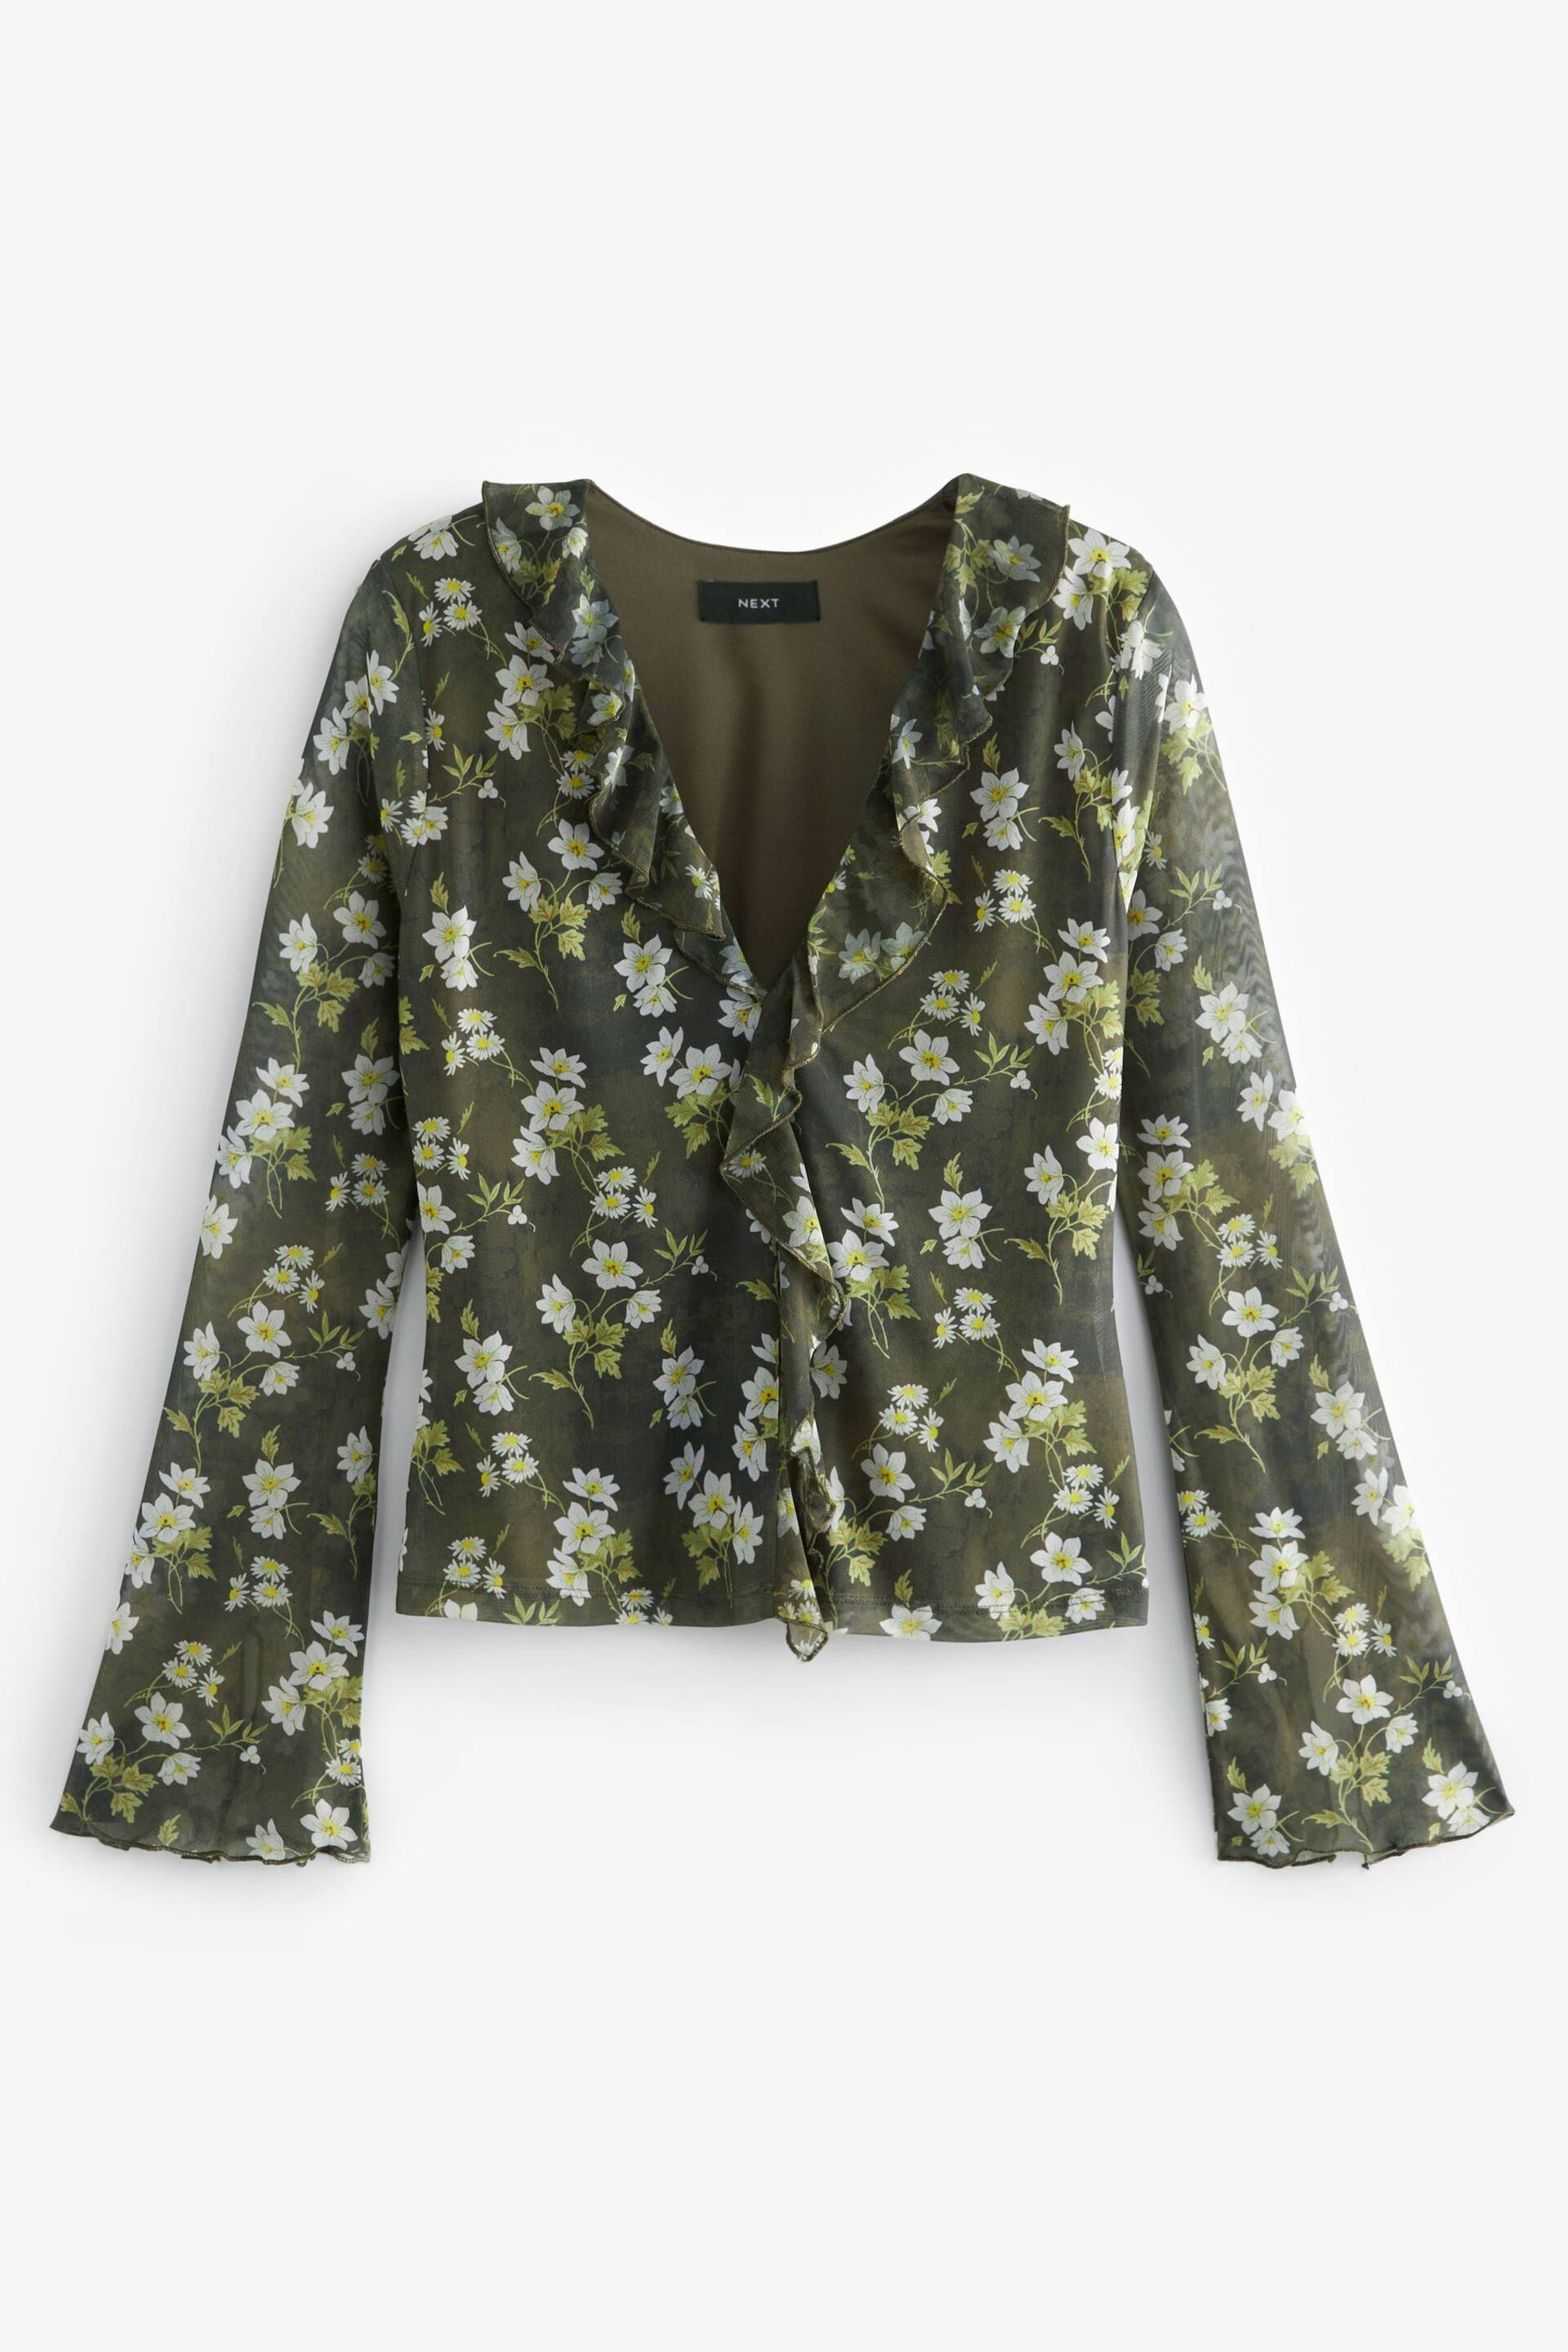 Khaki Green Ditsy Floral Long Sleeve Ruffle Front Mesh Top - Image 5 of 6